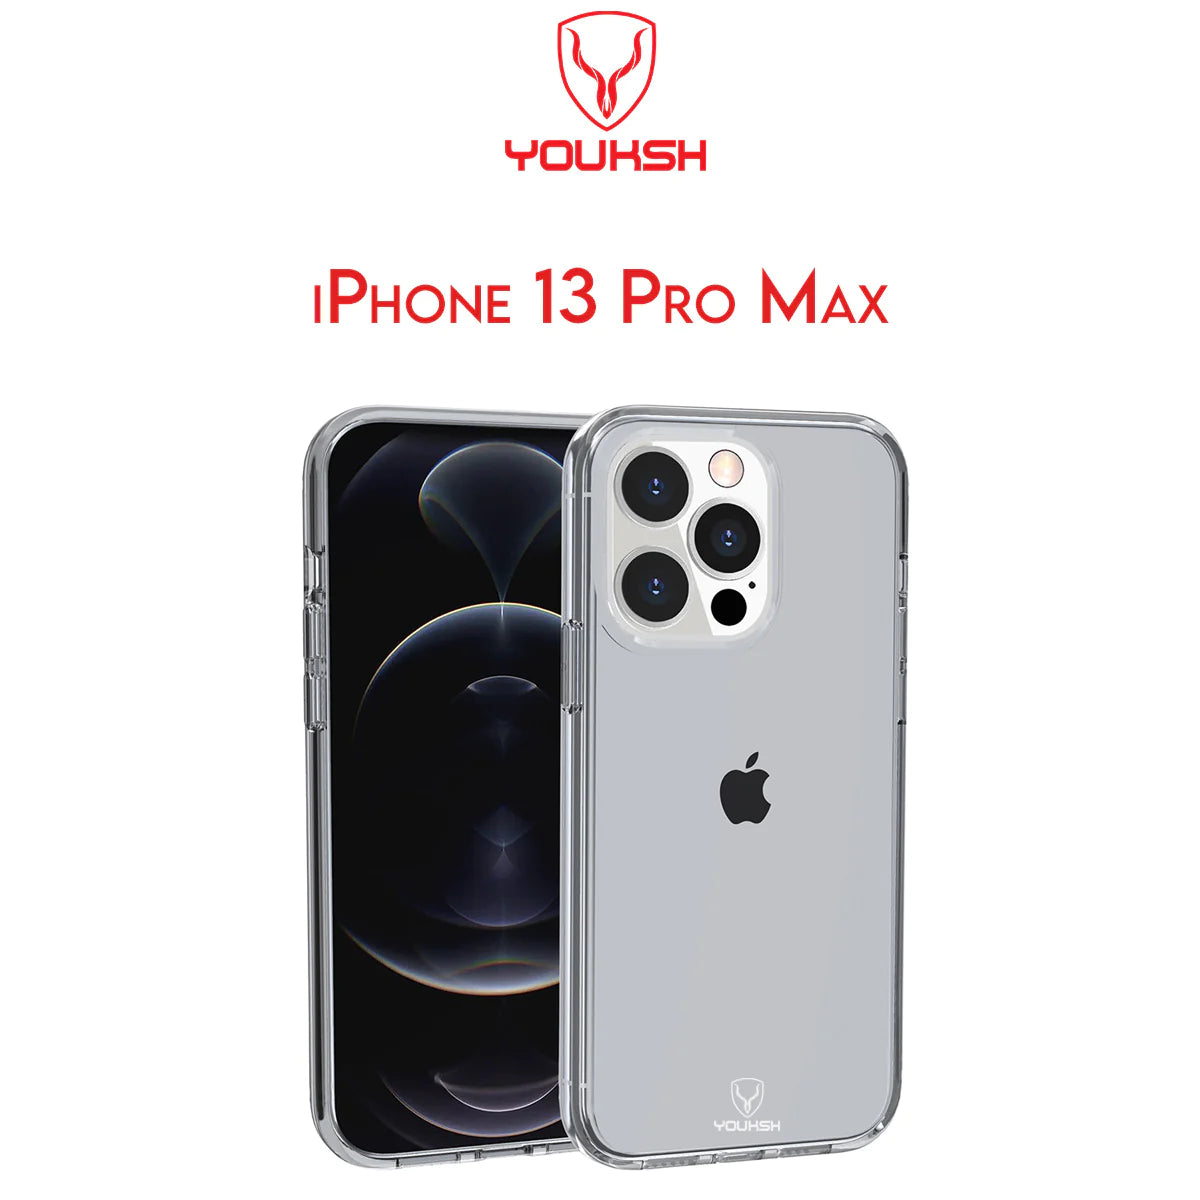 YOUKSH Apple iPhone 13 Pro Max Transparent Case | Soft Shock Proof Jelly Cover